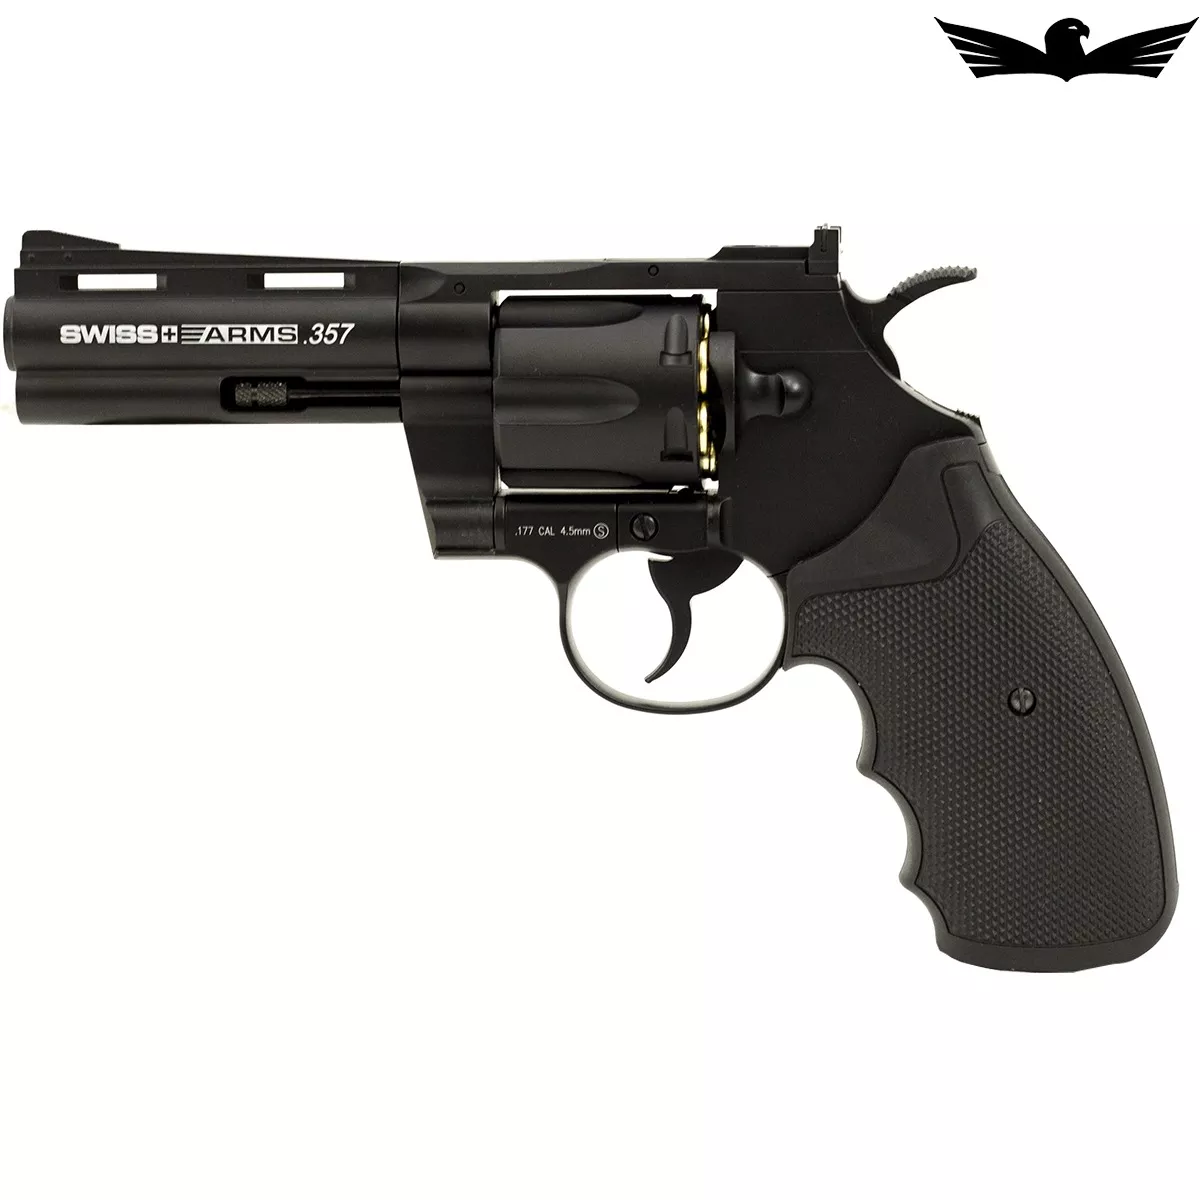 REVOLVER SWISS ARMS 357-4 CO2 METAL 4,5MM